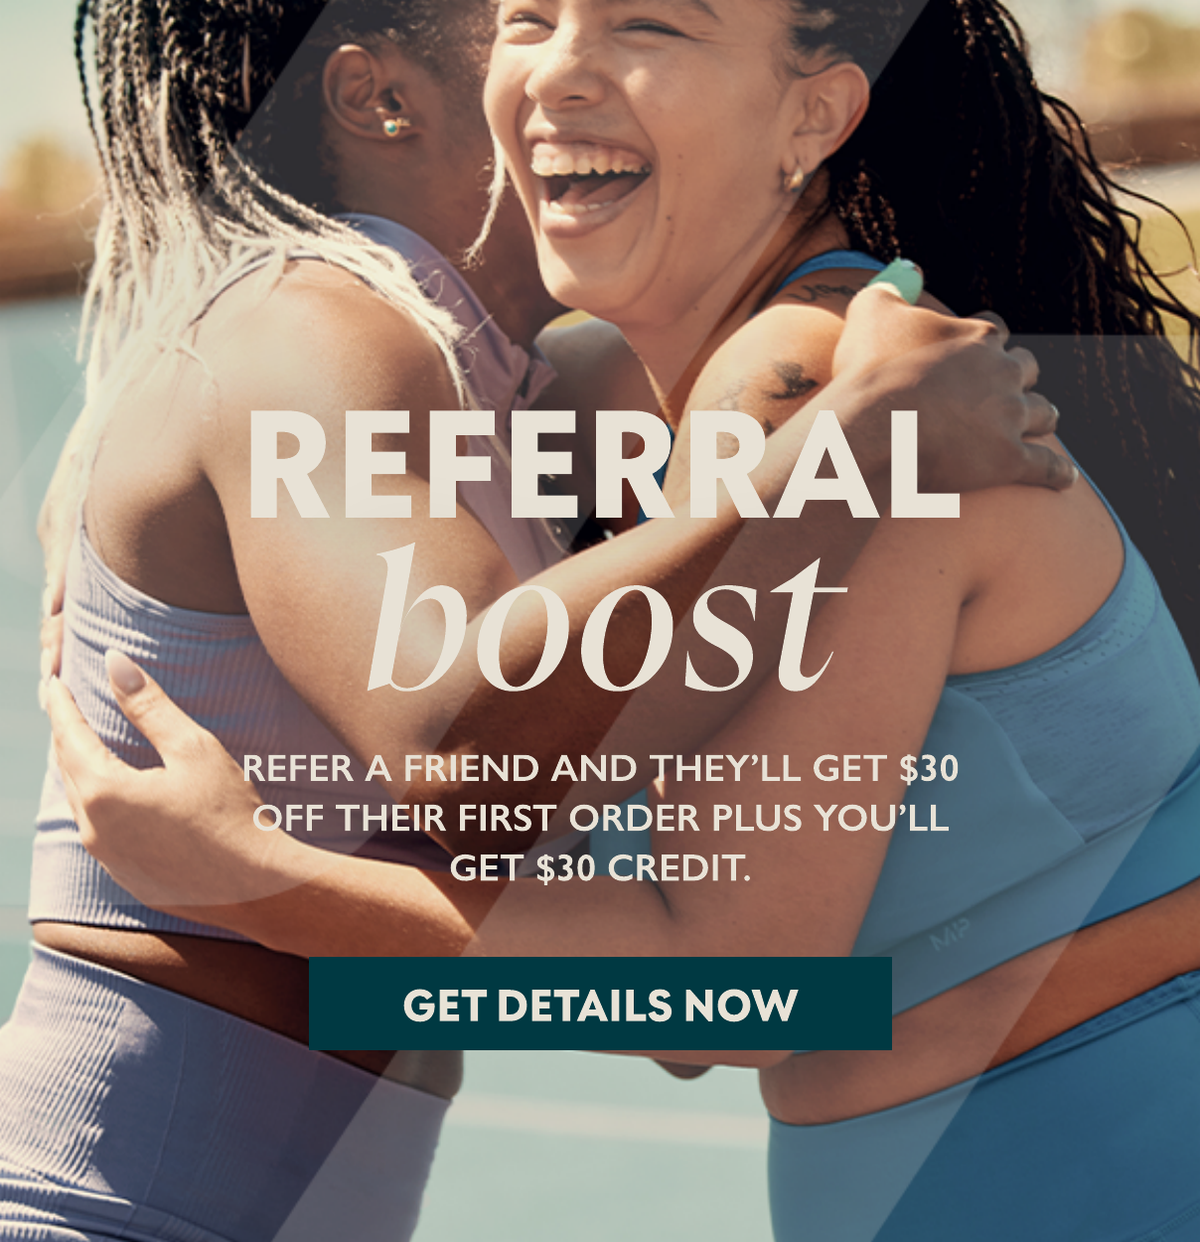 Boosted refer a friend and earn $30 for every friend successfully referred. Plus they get $30 off their first order.